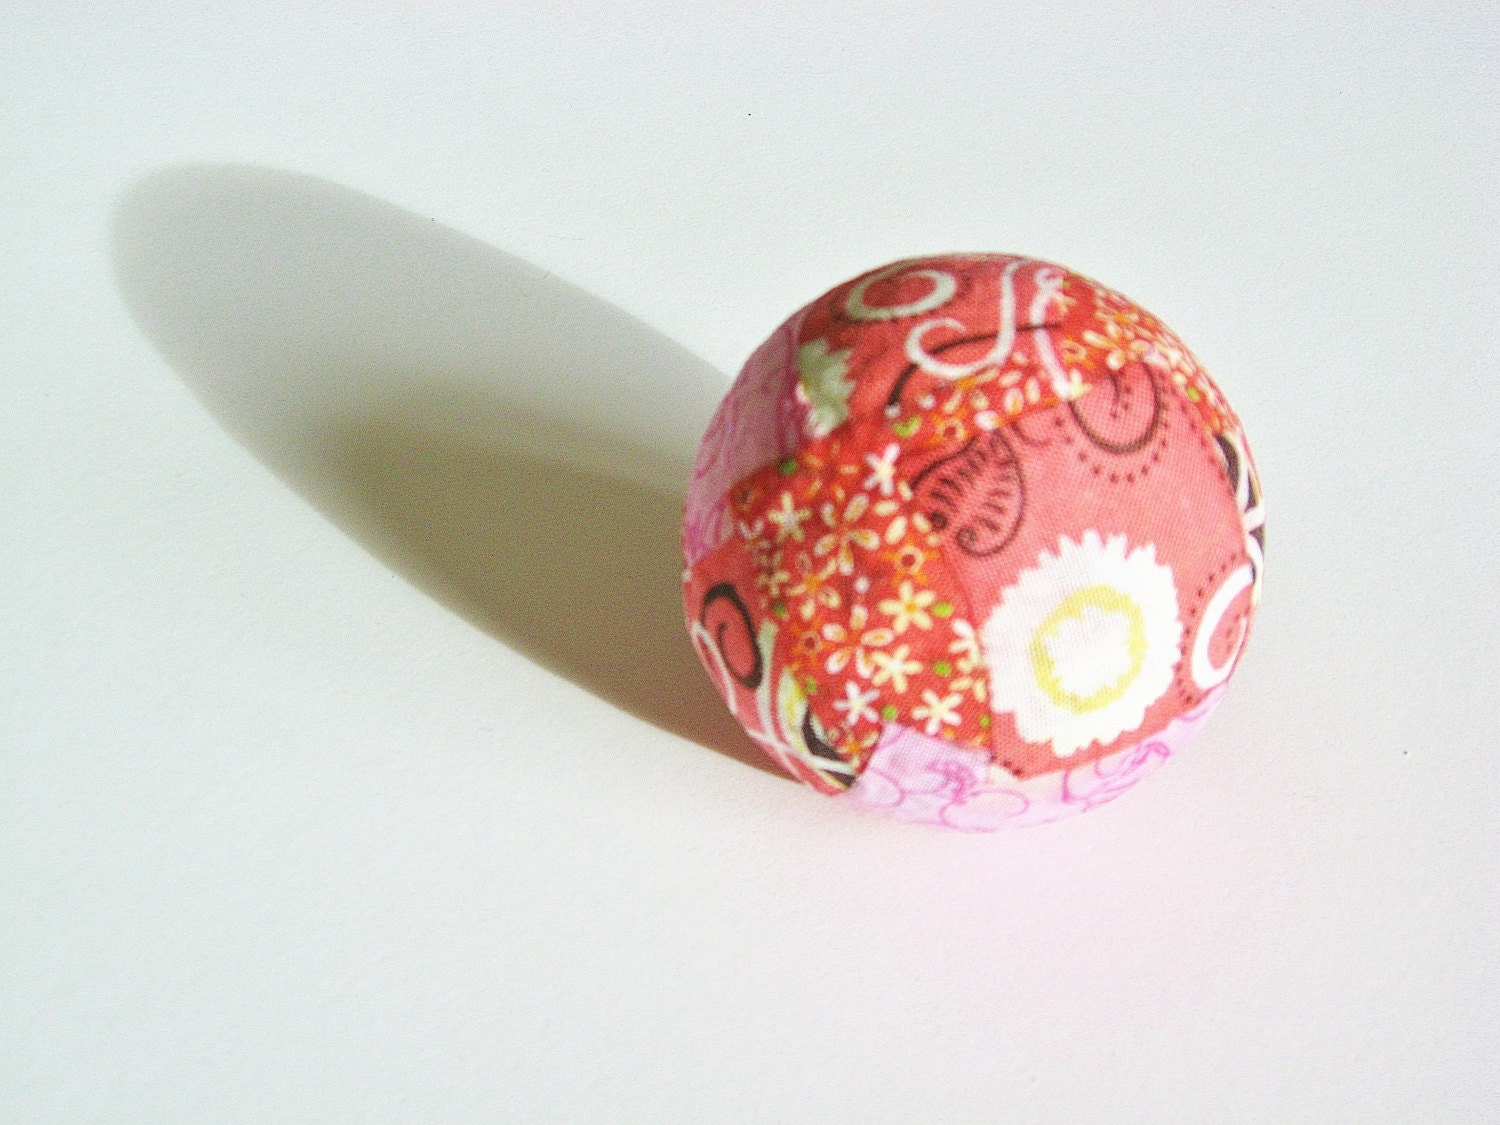 Pink Lady Bliss Therapy Ball - Effortless Massage & Pain Relief - Anywhere You Go  Epsteam RecycleParty teamupcyclers recycle upcycle